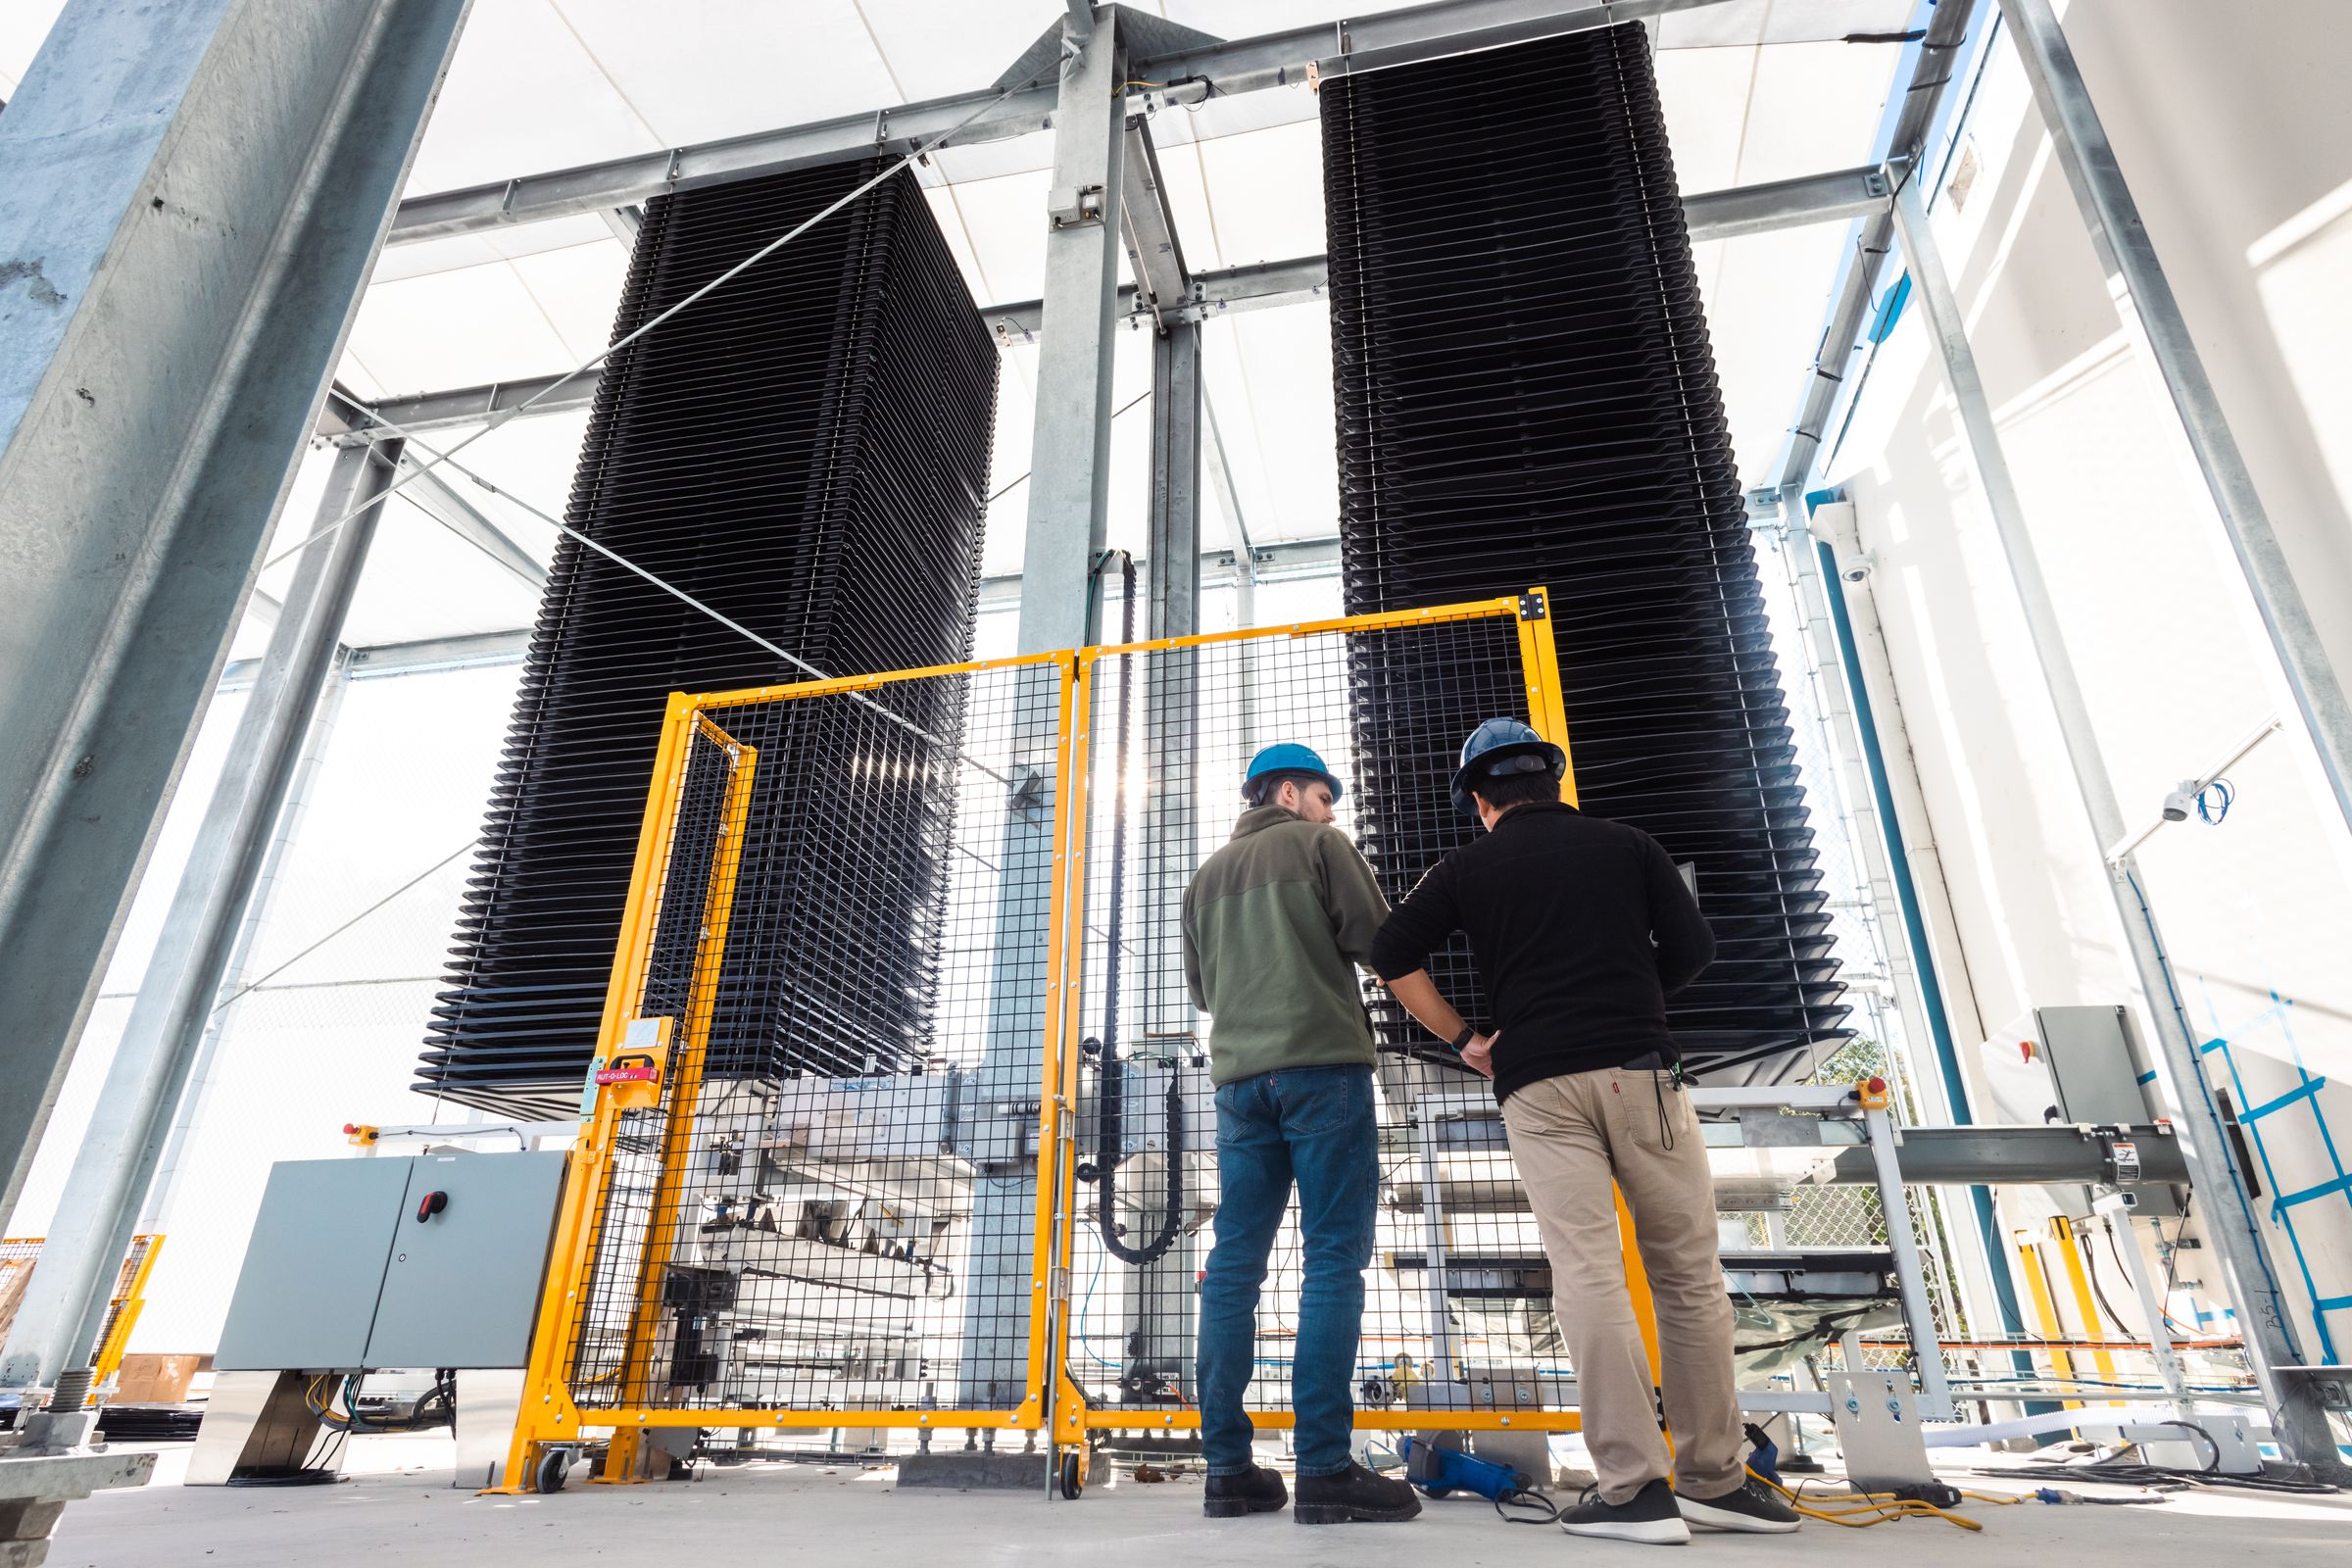 Two men wearing hard hats stand in front of rectangular stacks filtering CO2 out of the air